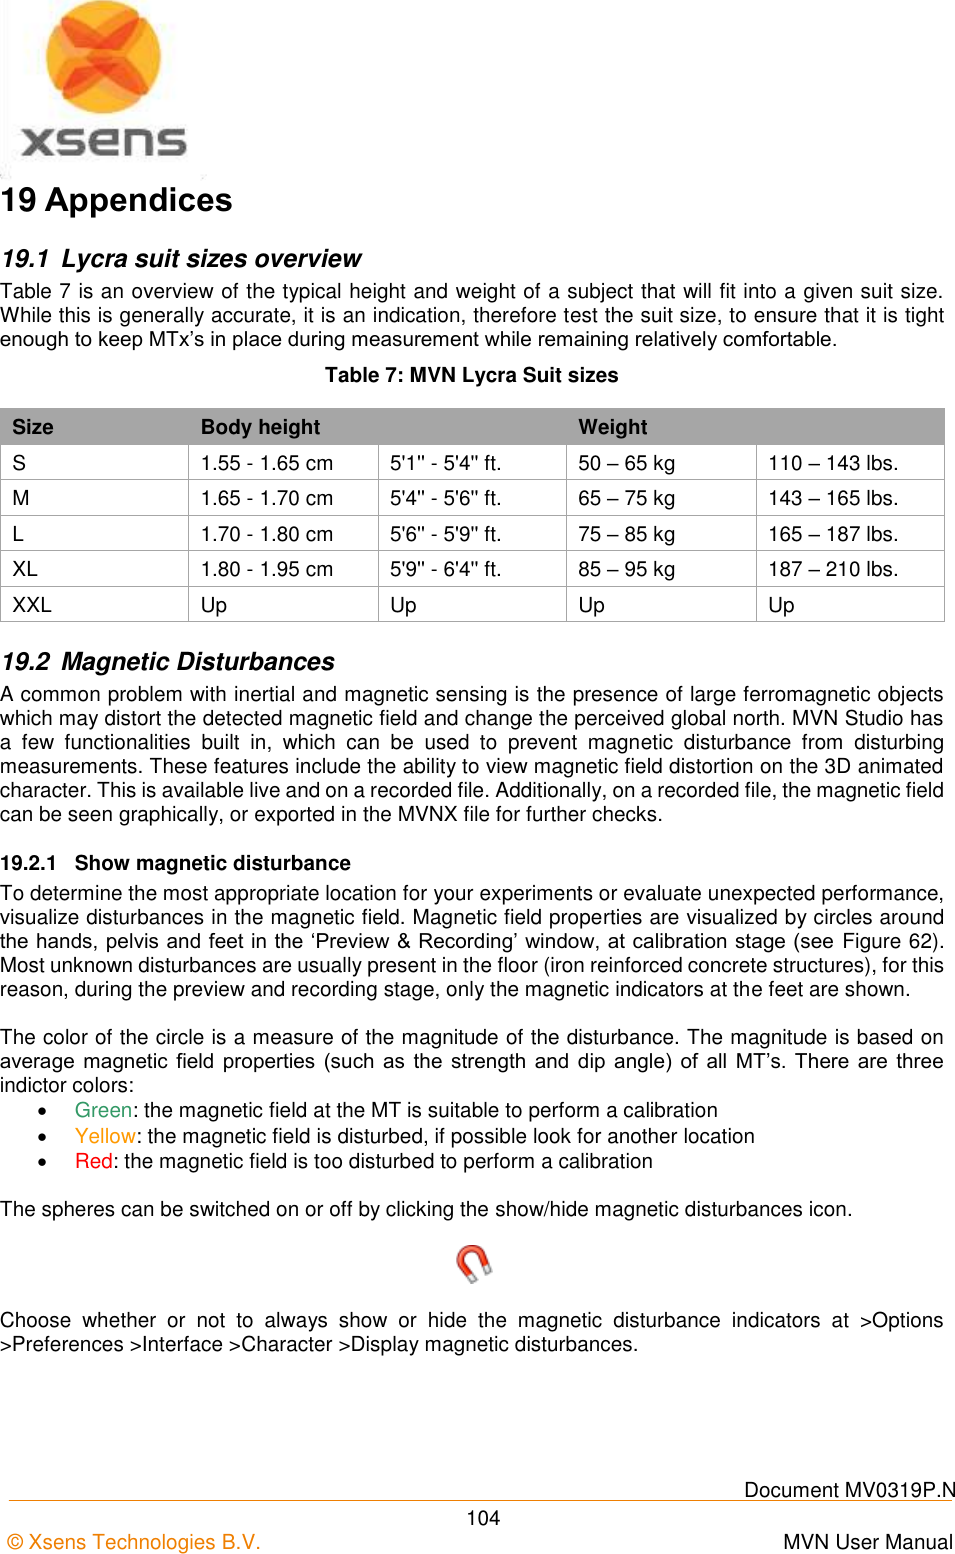    Document MV0319P.N © Xsens Technologies B.V.      MVN User Manual  104 19 Appendices 19.1  Lycra suit sizes overview Table 7 is an overview of the typical height and weight of a subject that will fit into a given suit size. While this is generally accurate, it is an indication, therefore test the suit size, to ensure that it is tight enough to keep MTx’s in place during measurement while remaining relatively comfortable. Table 7: MVN Lycra Suit sizes Size Body height  Weight  S 1.55 - 1.65 cm 5&apos;1&apos;&apos; - 5&apos;4&apos;&apos; ft. 50 – 65 kg 110 – 143 lbs. M 1.65 - 1.70 cm 5&apos;4&apos;&apos; - 5&apos;6&apos;&apos; ft. 65 – 75 kg 143 – 165 lbs. L 1.70 - 1.80 cm 5&apos;6&apos;&apos; - 5&apos;9&apos;&apos; ft. 75 – 85 kg 165 – 187 lbs. XL 1.80 - 1.95 cm 5&apos;9&apos;&apos; - 6&apos;4&apos;&apos; ft. 85 – 95 kg 187 – 210 lbs. XXL Up Up Up Up 19.2  Magnetic Disturbances A common problem with inertial and magnetic sensing is the presence of large ferromagnetic objects which may distort the detected magnetic field and change the perceived global north. MVN Studio has a  few  functionalities  built  in,  which  can  be  used  to  prevent  magnetic  disturbance  from  disturbing measurements. These features include the ability to view magnetic field distortion on the 3D animated character. This is available live and on a recorded file. Additionally, on a recorded file, the magnetic field can be seen graphically, or exported in the MVNX file for further checks. 19.2.1  Show magnetic disturbance To determine the most appropriate location for your experiments or evaluate unexpected performance, visualize disturbances in the magnetic field. Magnetic field properties are visualized by circles around the hands, pelvis and feet in the ‘Preview &amp; Recording’ window, at calibration stage (see Figure 62). Most unknown disturbances are usually present in the floor (iron reinforced concrete structures), for this reason, during the preview and recording stage, only the magnetic indicators at the feet are shown.  The color of the circle is a measure of the magnitude of the disturbance. The magnitude is based on average magnetic field properties  (such  as  the strength  and dip  angle) of  all MT’s. There are three indictor colors:  Green: the magnetic field at the MT is suitable to perform a calibration  Yellow: the magnetic field is disturbed, if possible look for another location  Red: the magnetic field is too disturbed to perform a calibration  The spheres can be switched on or off by clicking the show/hide magnetic disturbances icon.  Choose  whether  or  not  to  always  show  or  hide  the  magnetic  disturbance  indicators  at  &gt;Options &gt;Preferences &gt;Interface &gt;Character &gt;Display magnetic disturbances. 